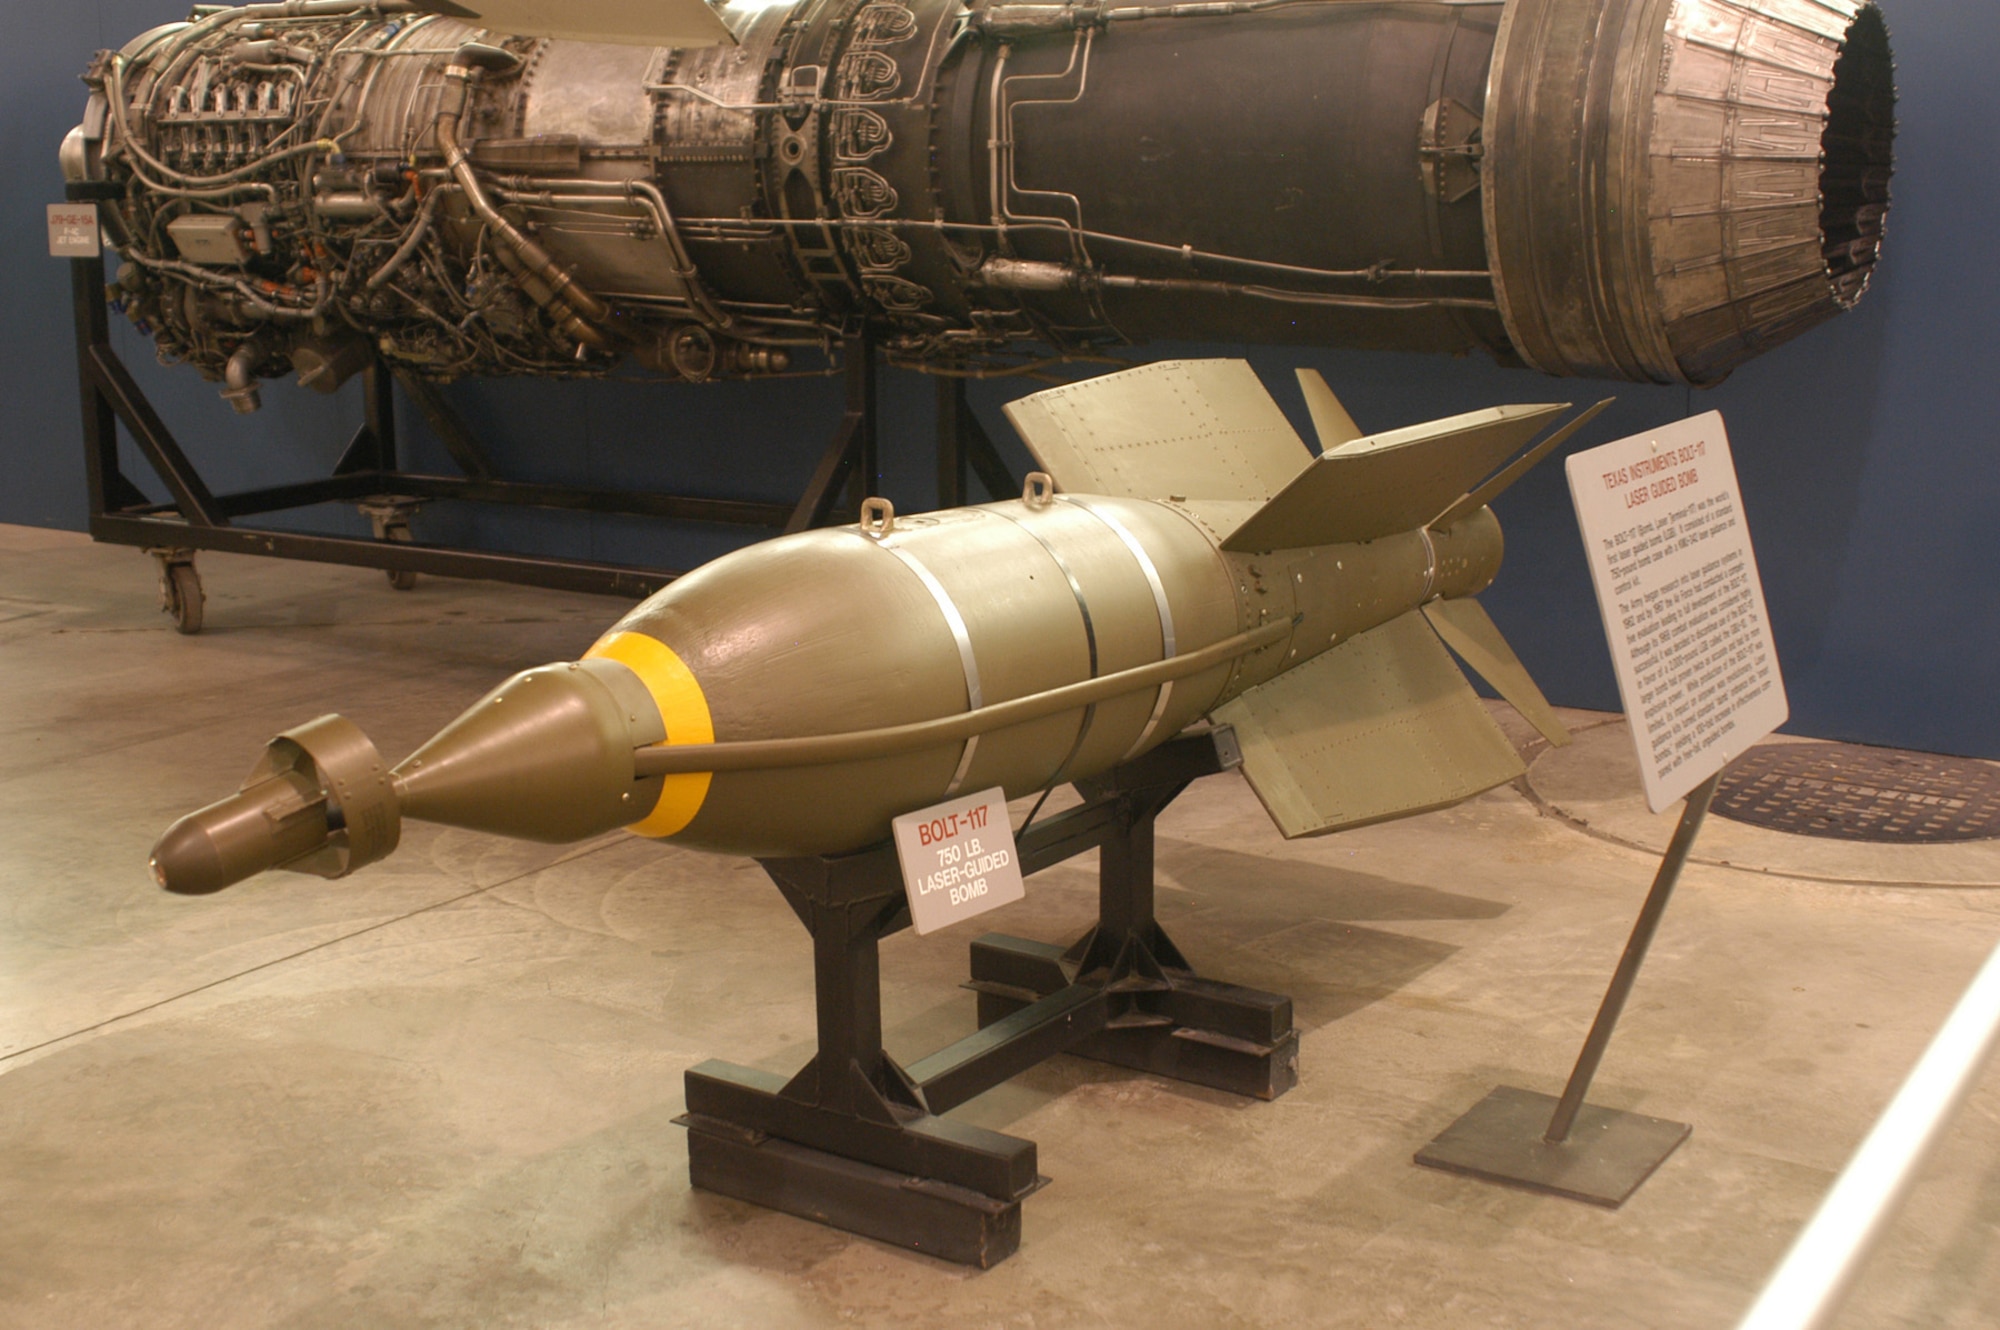 DAYTON, Ohio - Texas Instruments Bolt-117 Laser Guided Bomb on display at the National Museum of the U.S. Air Force. (U.S. Air Force photo)